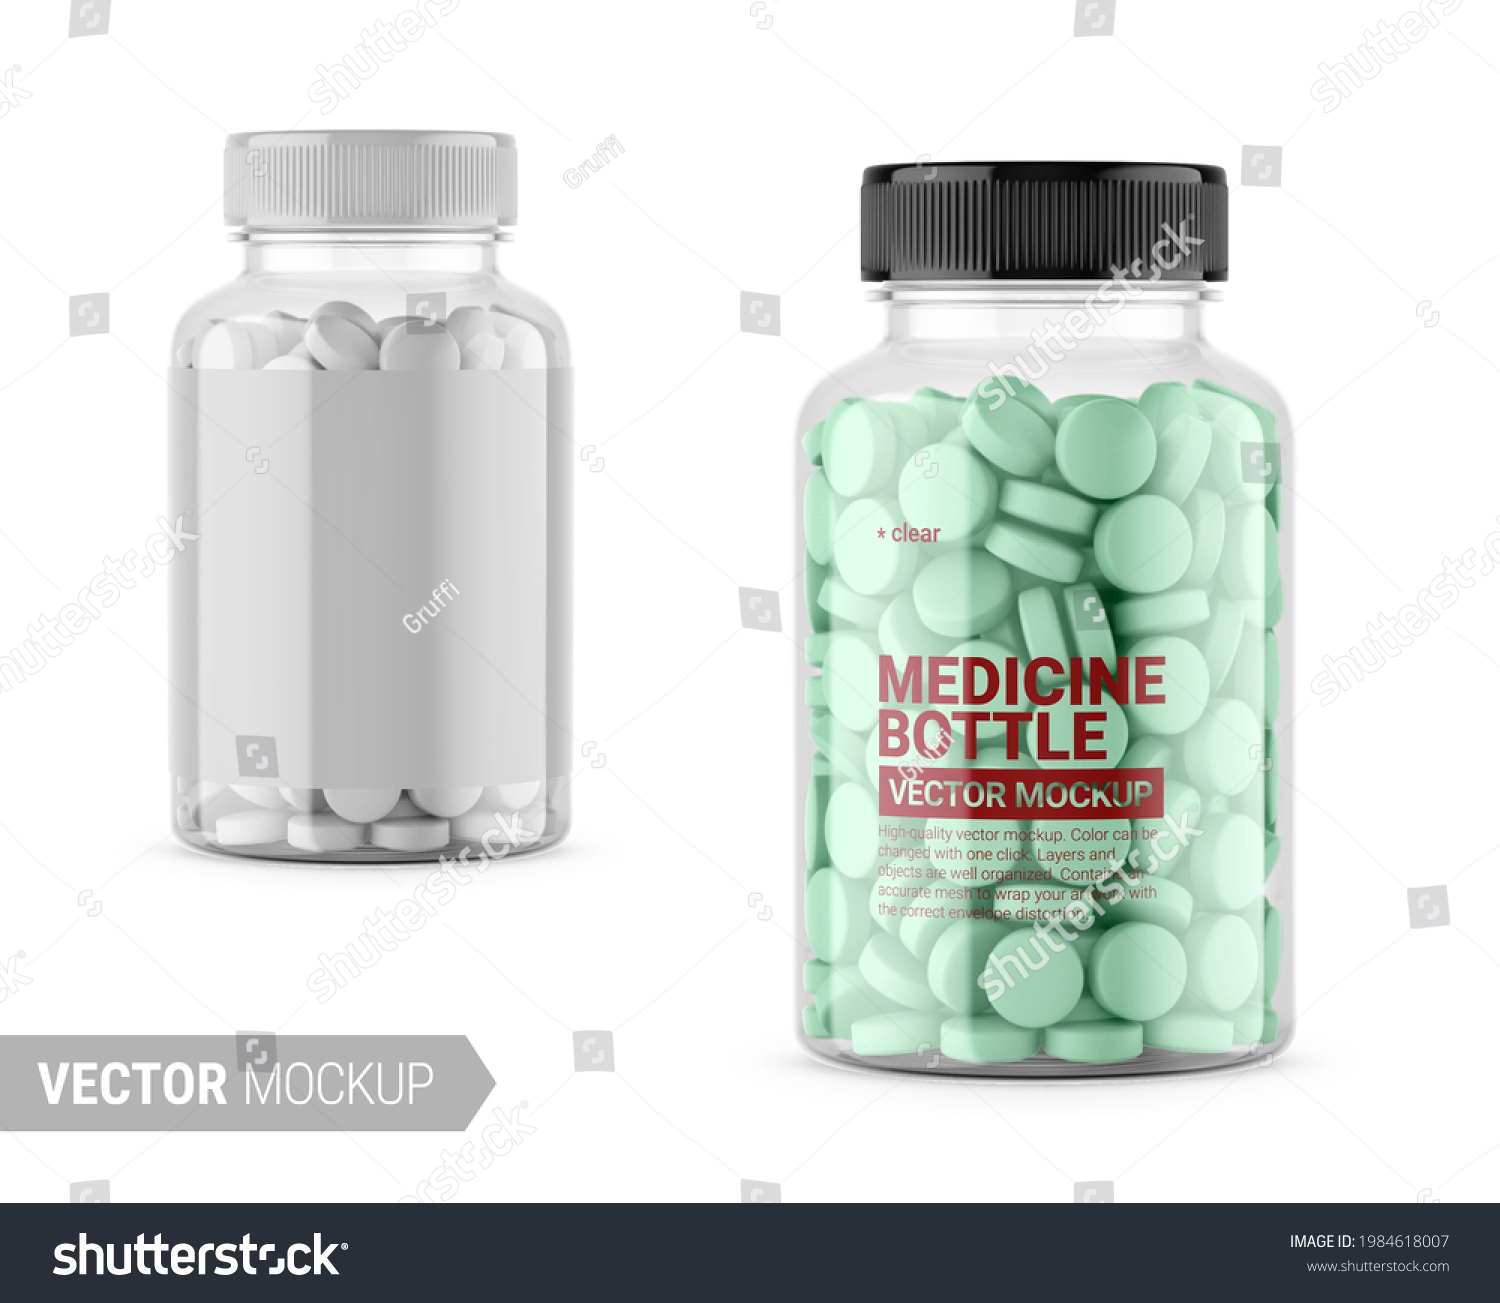 SVG of Clear glass medicine bottle with tablets, transparent on background. Contains accurate mesh to wrap your design with envelope distortion. Photo-realistic packaging vector mockup template with sample. svg